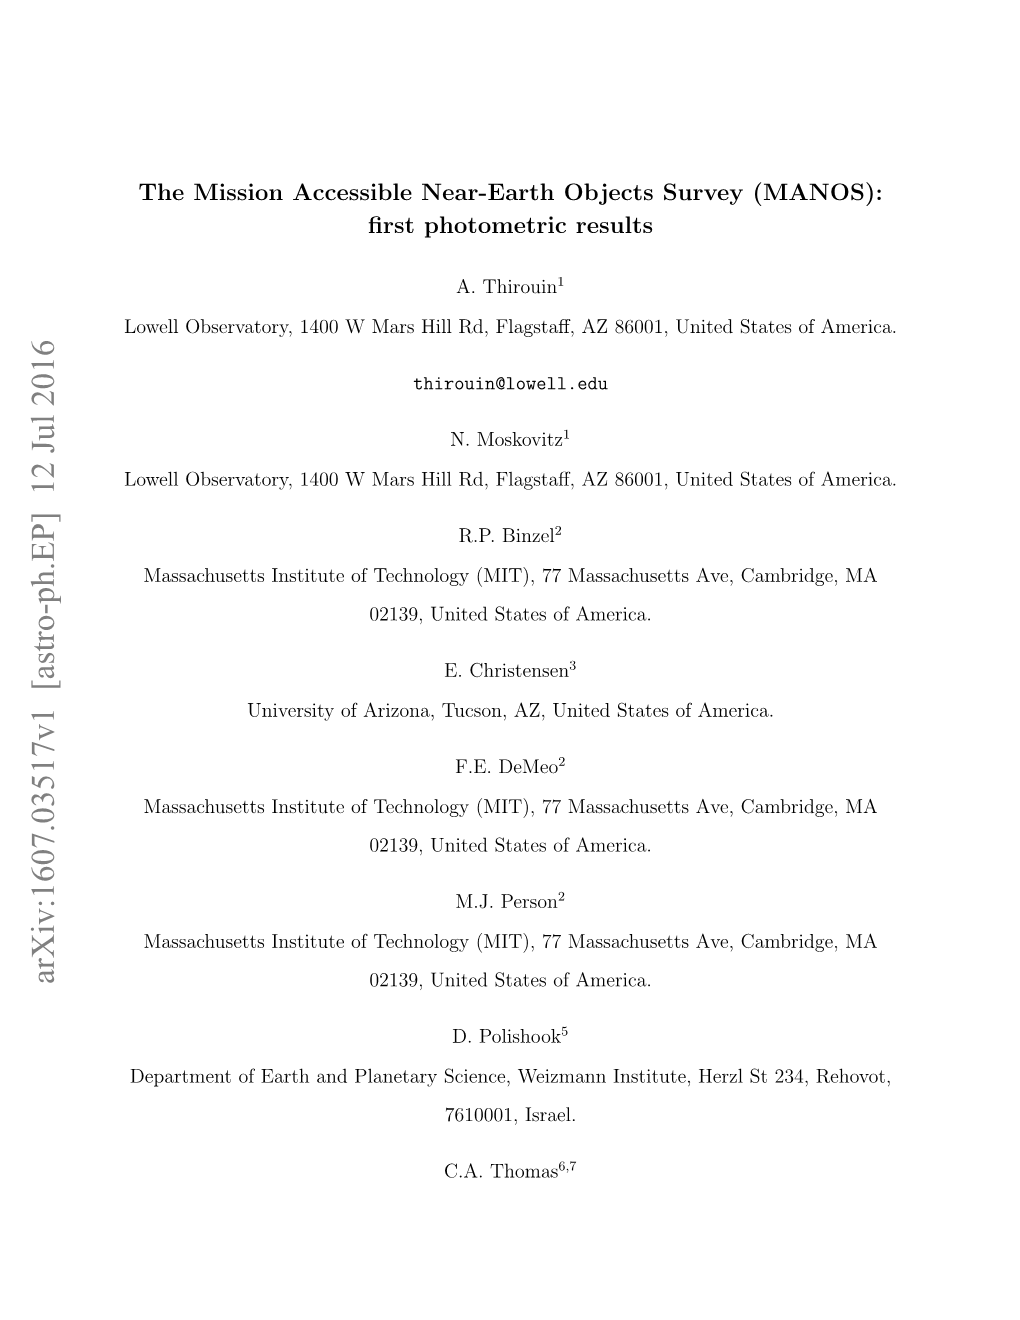 The Mission Accessible Near-Earth Objects Survey (MANOS): First Photometric Results